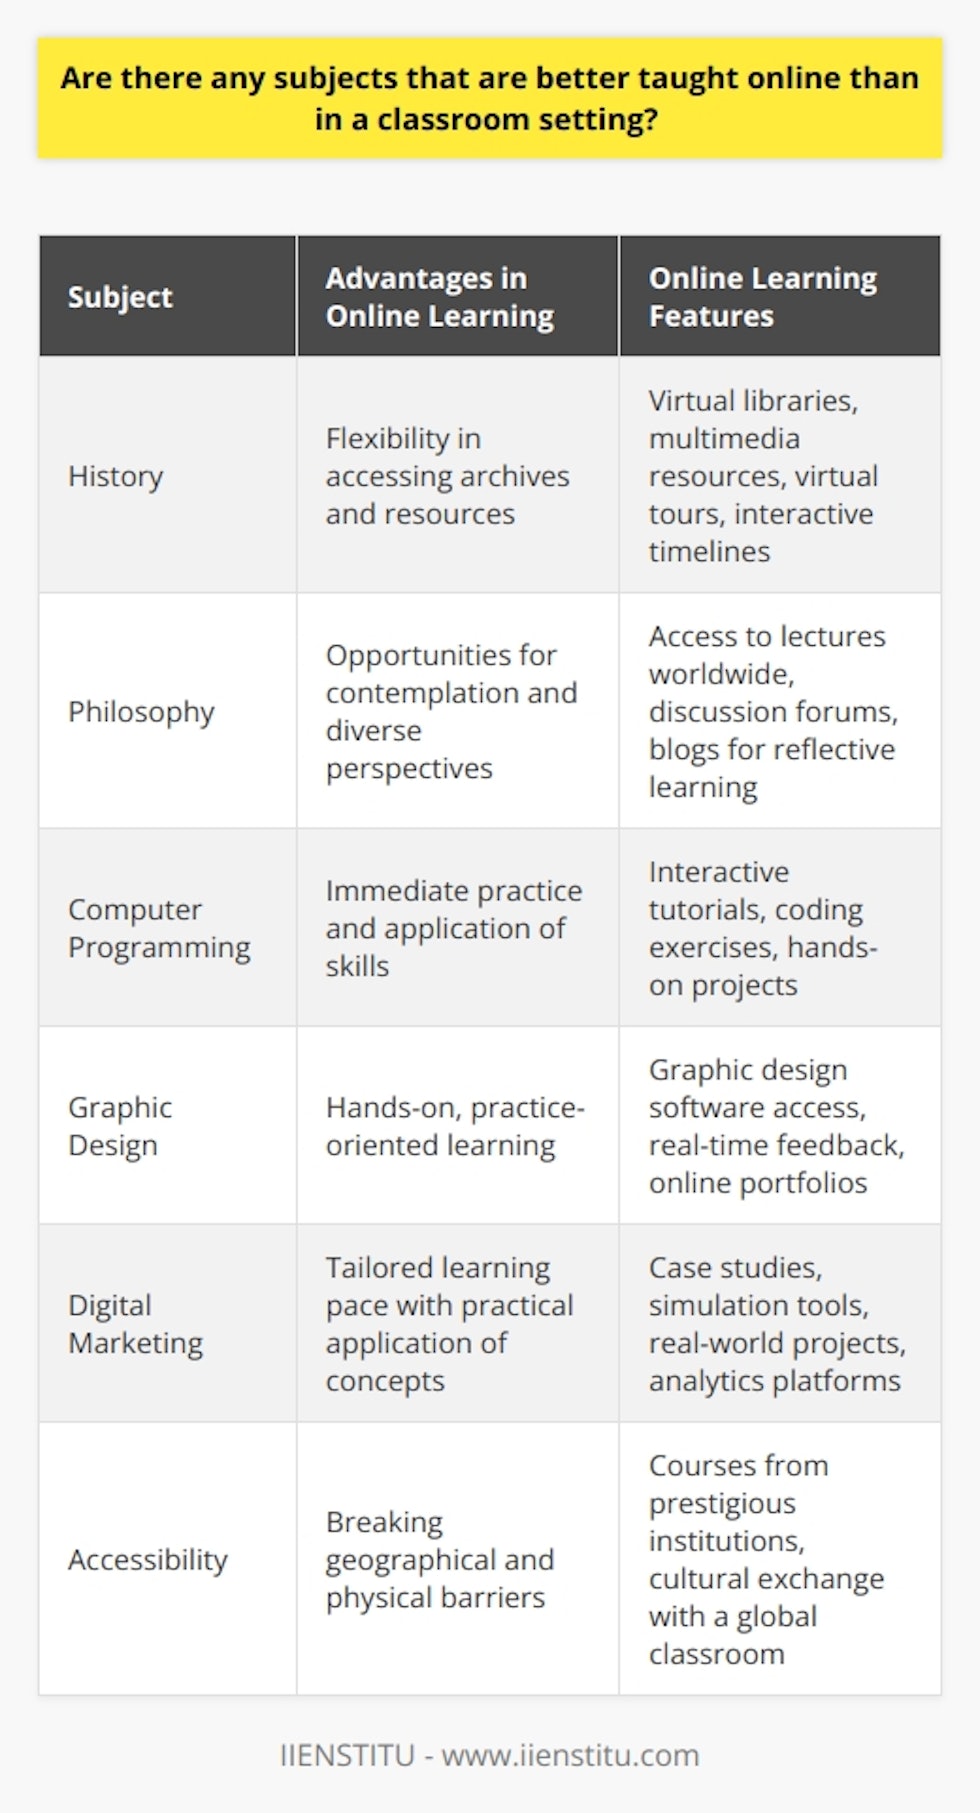 In the ever-evolving landscape of education, online learning platforms have introduced a new dimension to how knowledge is acquired and skills are developed. Among these digital havens of learning, IIENSTITU stands out as a beacon for those seeking to expand their horizons without the constraints of physical classrooms. Certain subjects, with their unique educational requirements, are particularly amenable to the online format, harnessing the power of the internet to enhance the learning experience in ways that traditional settings may struggle to match.History, as a discipline that relies heavily on extensive reading, analysis of events, and comprehension of timelines, is one such subject. Online courses offer history students the flexibility to delve into archives, virtual libraries, and a plethora of multimedia resources that can bring historical events to life. This access to a diverse range of sources, including primary documents, virtual tours of historical sites, and interactive timelines, can deepen understanding and engagement without the limits of a physical library or the time constraints of a classroom schedule.Philosophy, with its emphasis on contemplation, critical thinking, and extensive reading, thrives in an online environment. Students can engage with complex texts, participate in discussion forums that cultivate diverse perspectives, and listen to lectures from philosophers around the world. Such a setting also allows for contemplative learning, where one can take the time to ponder over philosophical arguments and theories, perhaps contributing to discussion threads or blog posts in a reflective manner that classroom settings with their limited time slots might not permit.Practical subjects that require learning by doing, such as computer programming, graphic design, or digital marketing, also benefit immensely from online learning. Online platforms, like IIENSTITU, often provide interactive tutorials, coding exercises, and projects that offer on-the-spot practice and immediate application of skills. This hands-on, practice-oriented approach caters to students who may find the abstract and theoretical discussions in traditional classrooms less engaging or effective for their learning style.Additionally, for students who face challenges sitting still due to attention difficulties or physical discomfort, online courses offer the chance to break the monotony by providing a change of scenery. Learners can choose a comfortable environment while also managing the pace of their study, taking breaks when necessary, and customizing their learning space with whatever aids or comforts contribute to their concentration and retention.Online learning is not restricted by geographical boundaries, allowing students from remote or underserved areas to access courses that might not be available locally. Global connectivity bridges the gap for those seeking specialized subjects or courses offered by prestigious institutions that would otherwise be out of reach. It also permits a cultural exchange through interaction with peers from around the world, thus broadening the educational scope beyond parochial limits.In conclusion, while not every subject or individual may thrive exclusively in an online format, there are clear advantages that online learning offers for subjects like history and philosophy, practical learning by doing disciplines, and for students who seek flexibility and access beyond their local offerings. IIENSTITU and similar platforms have harnessed the potential of digital education, leading learners to a path where knowledge knows no bounds. Through technology's lens, they redefine the educational experience, allowing learners to tailor their education journey to their personal needs and curiosities.